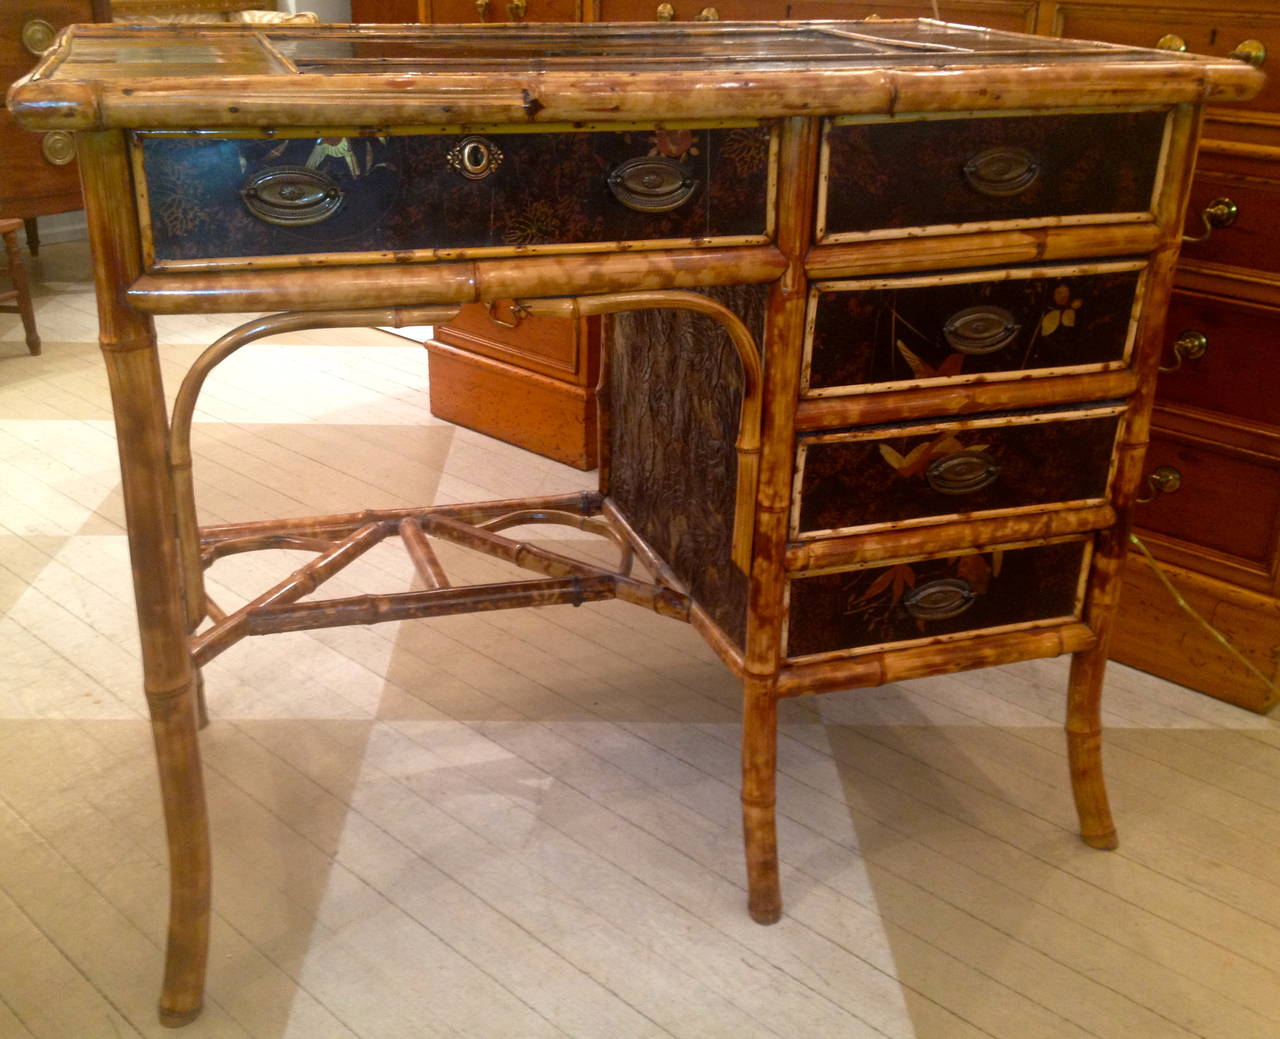 19th century English bamboo chinoiserie lacquered desk.